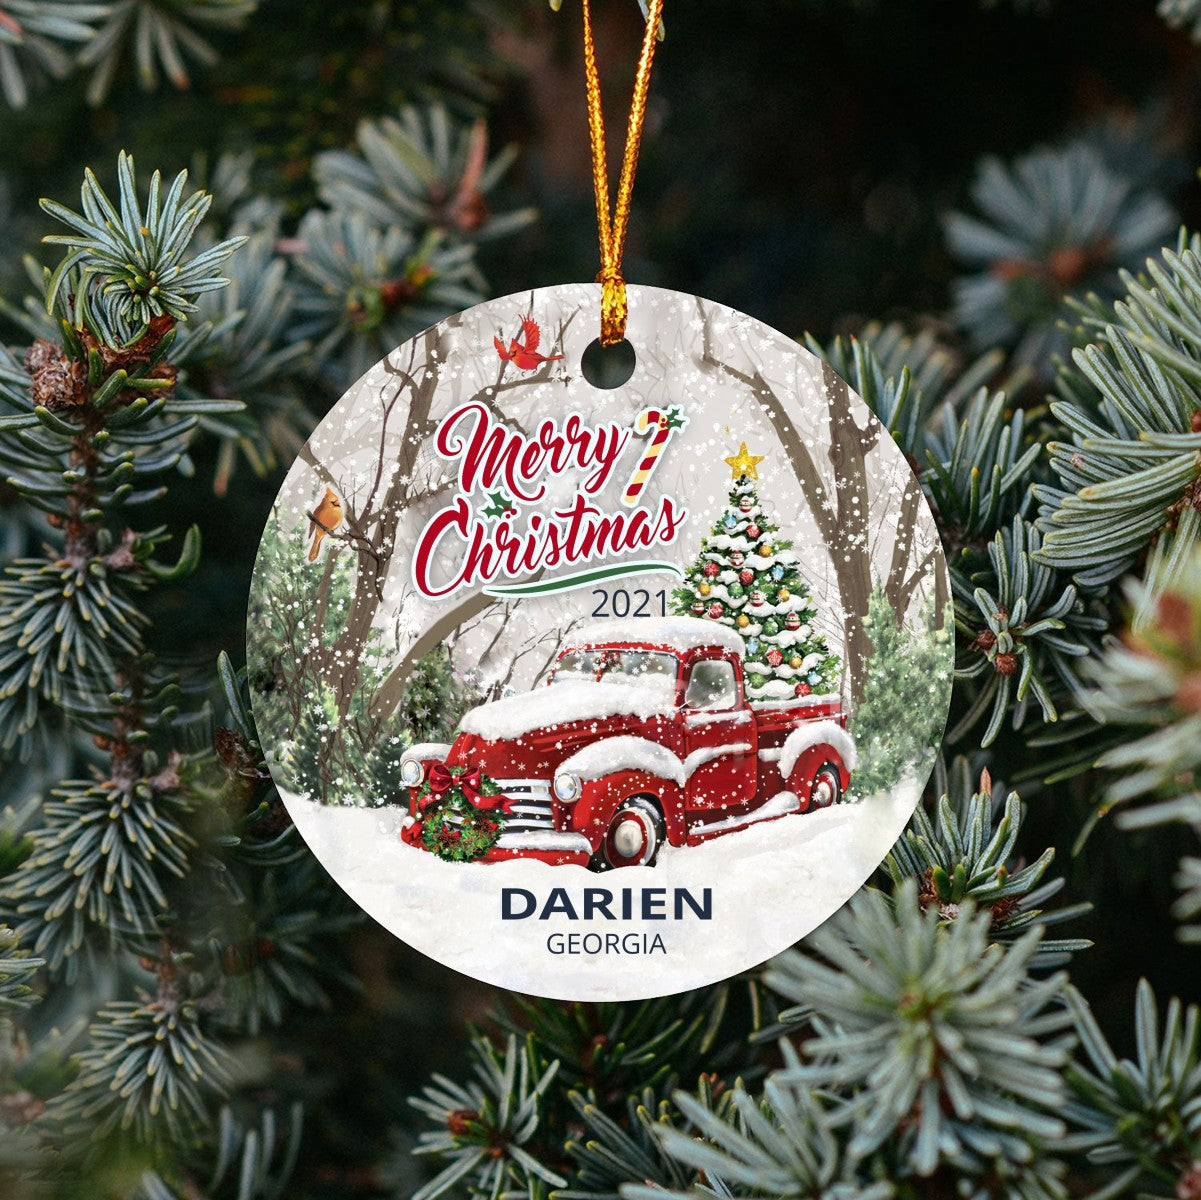 Christmas Tree Ornaments Darien - Ornament With Name City, State Darien Georgia GA Ornament - Red Truck Xmas Ornaments 3'' Plastic Gift For Family, Friend And Housewarming